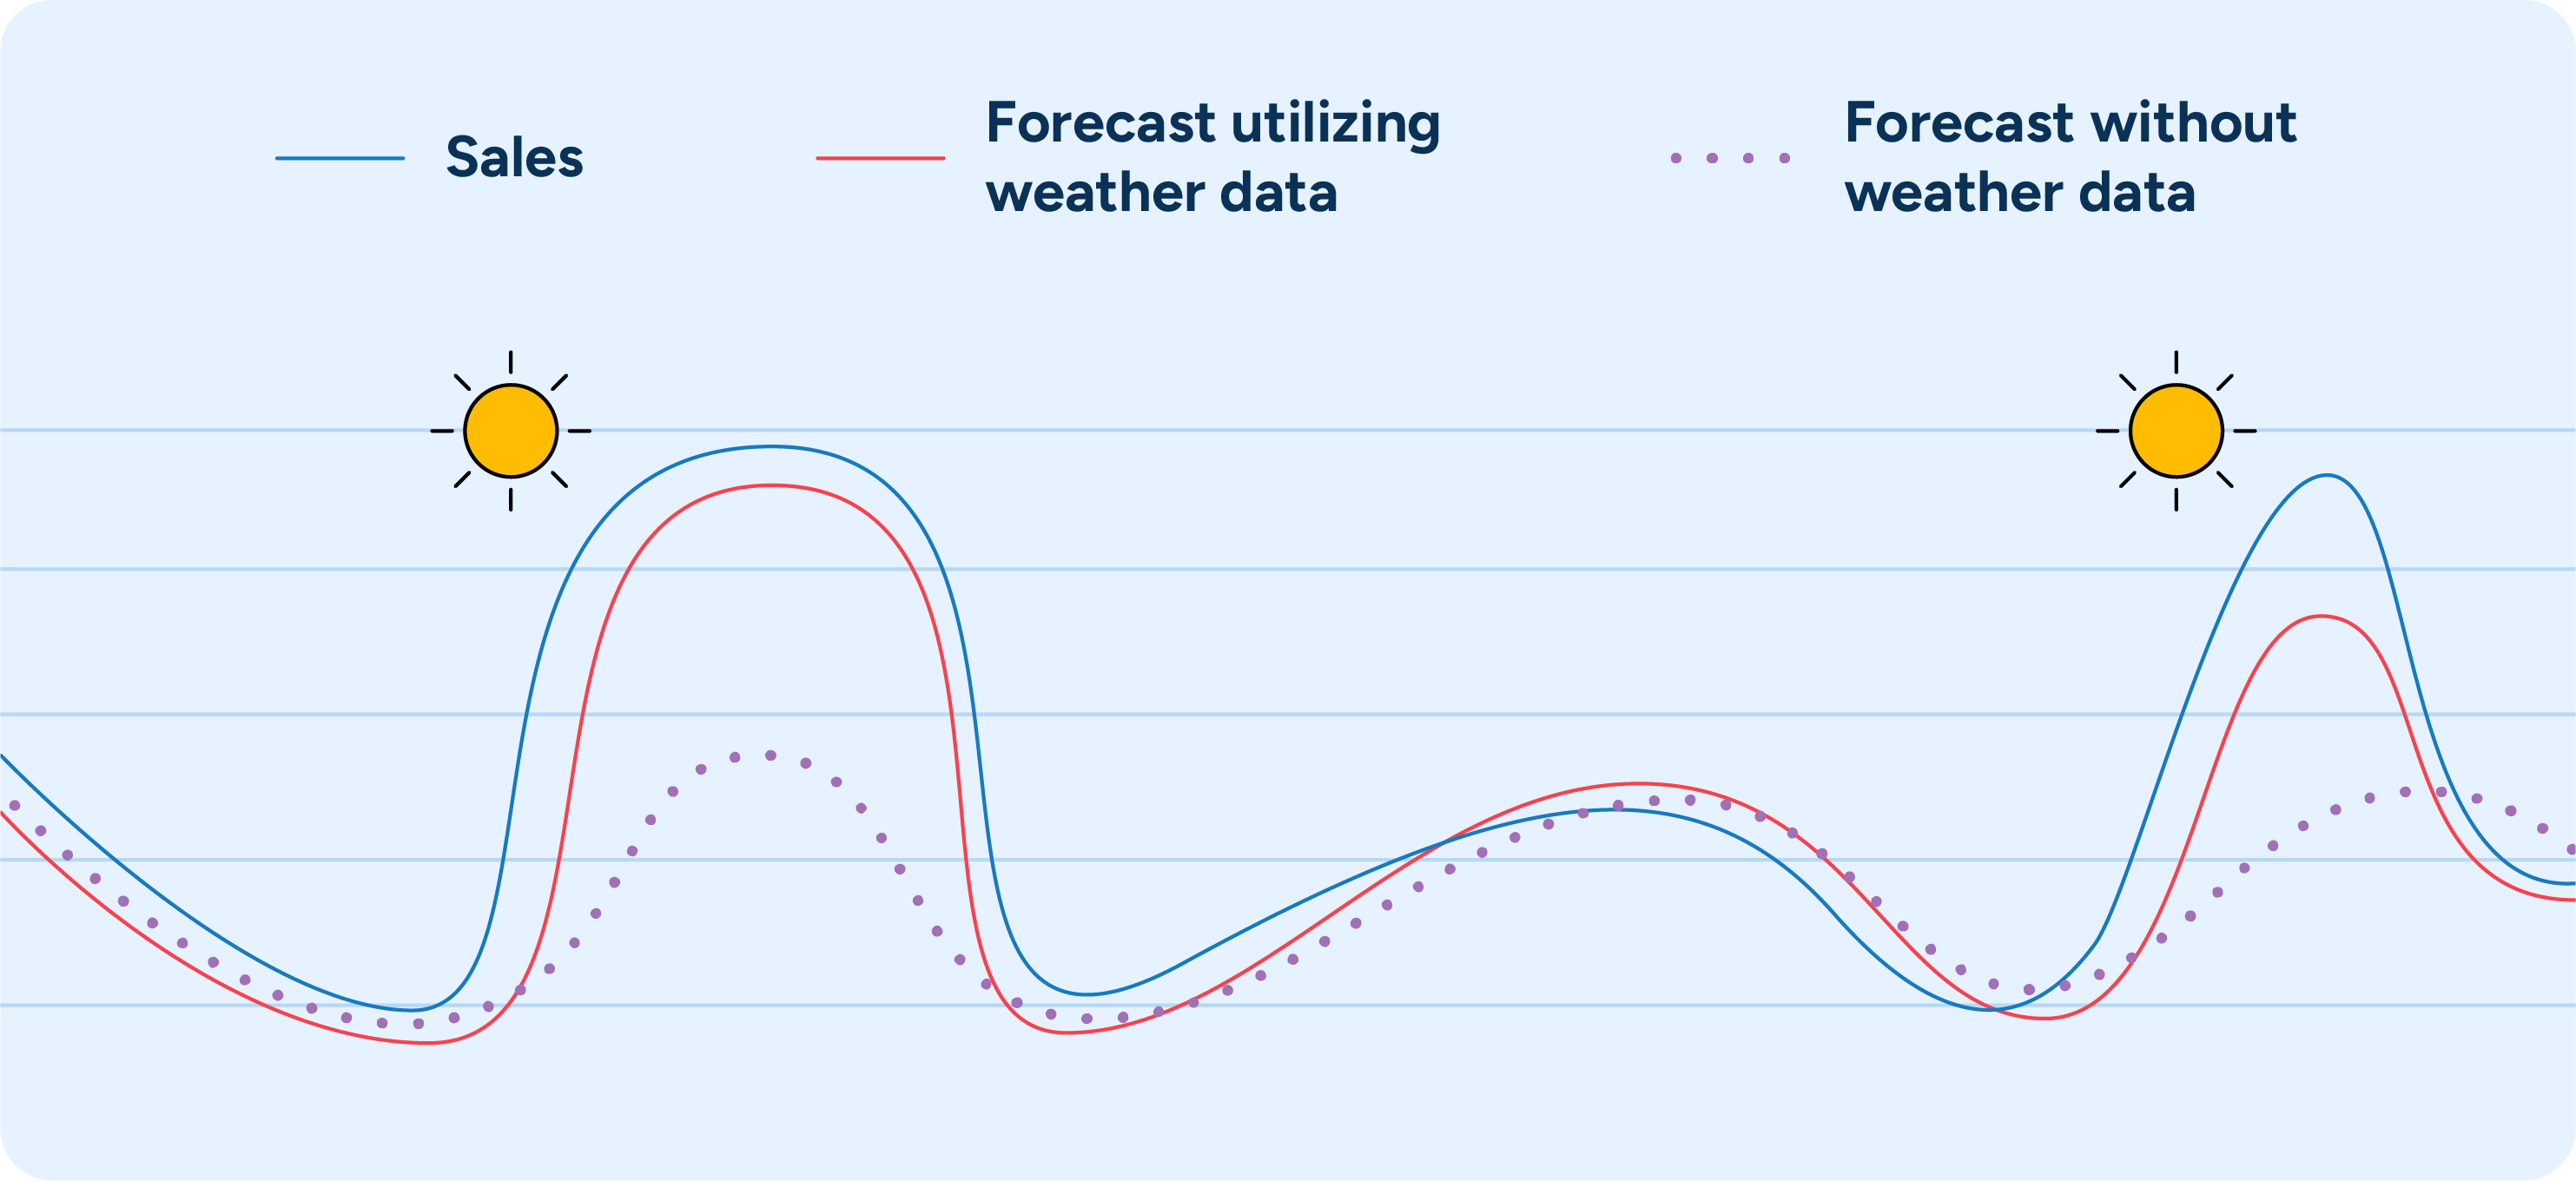 A chart showing demand forecasts with and without considering weather data.